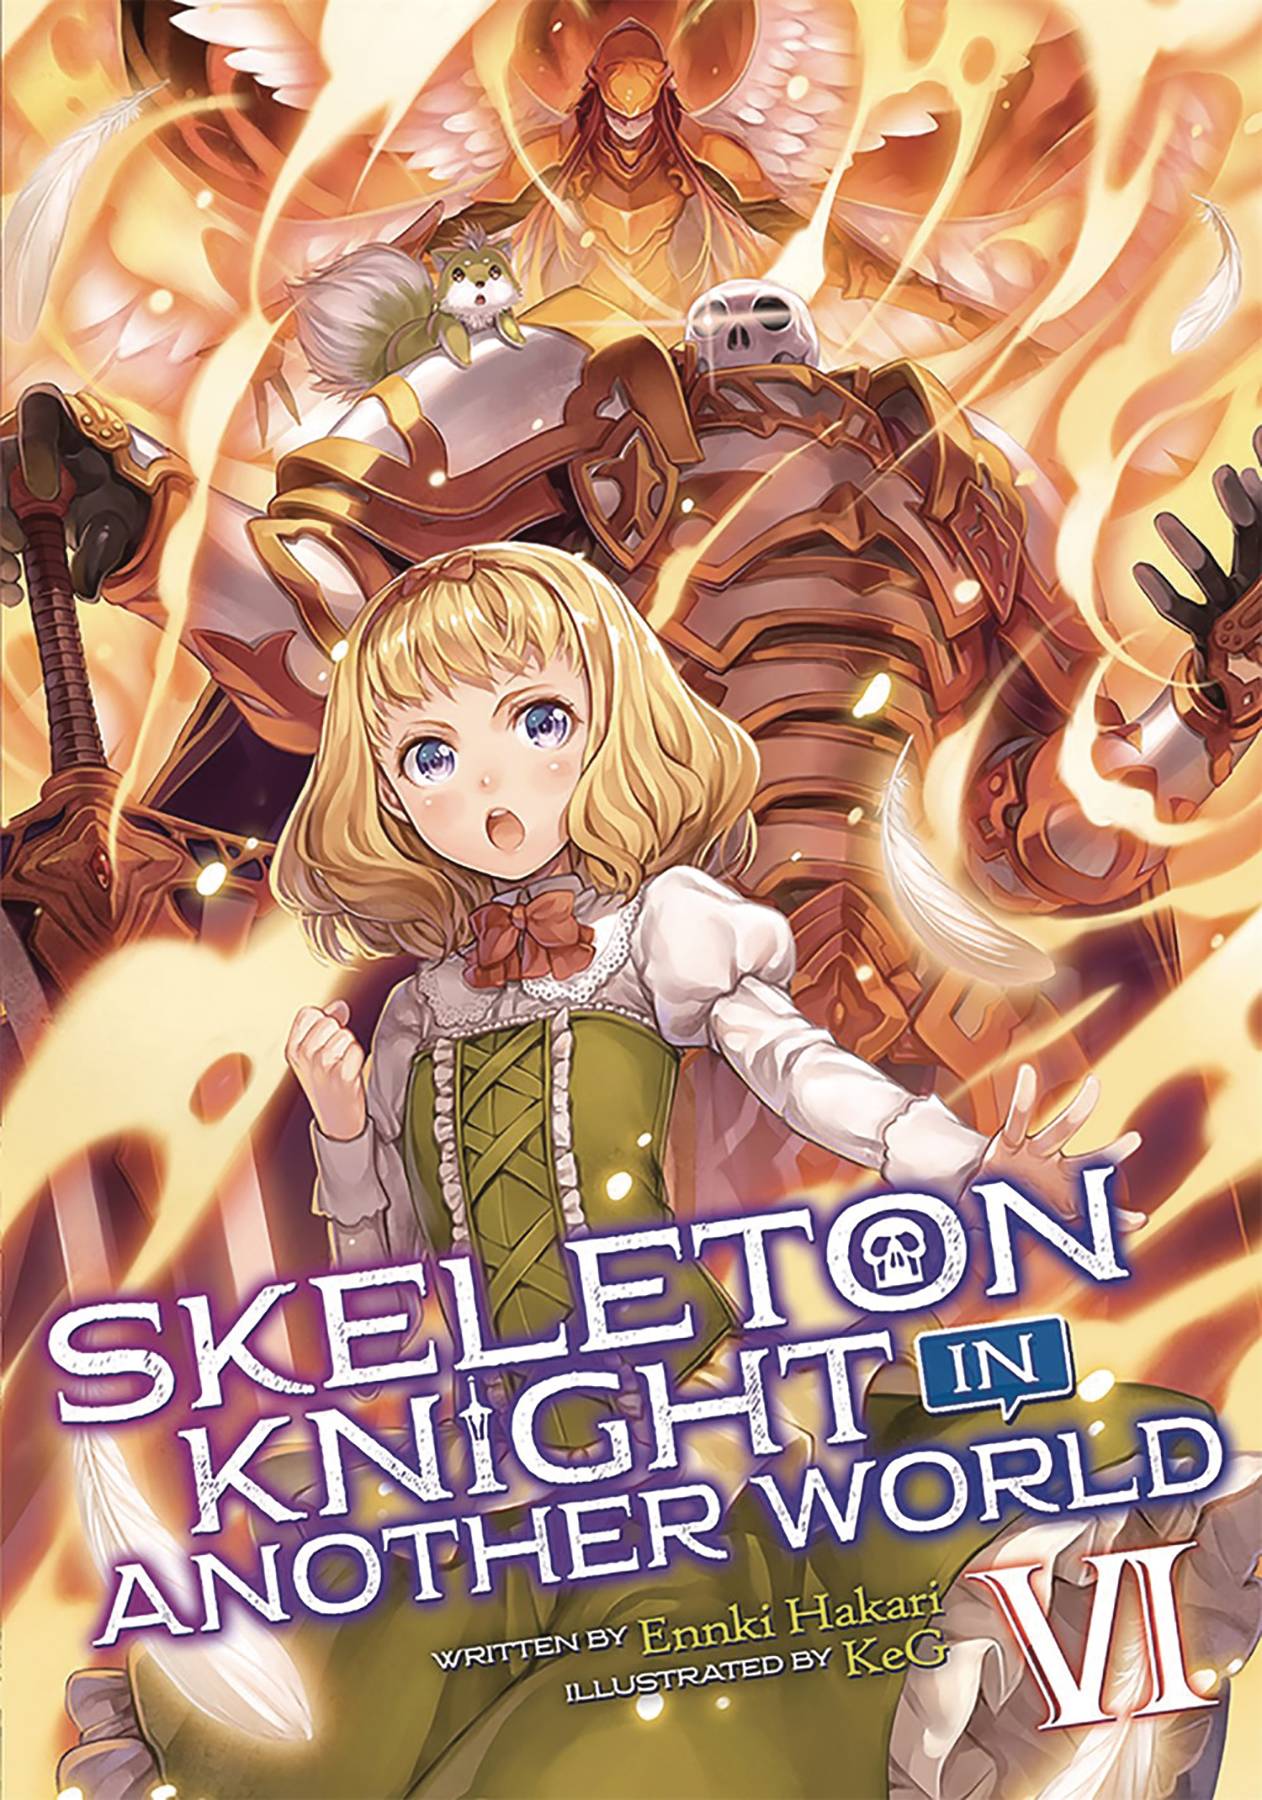 Anime Skeleton Knight in Another World 4k Ultra HD Wallpaper by ミコシバ